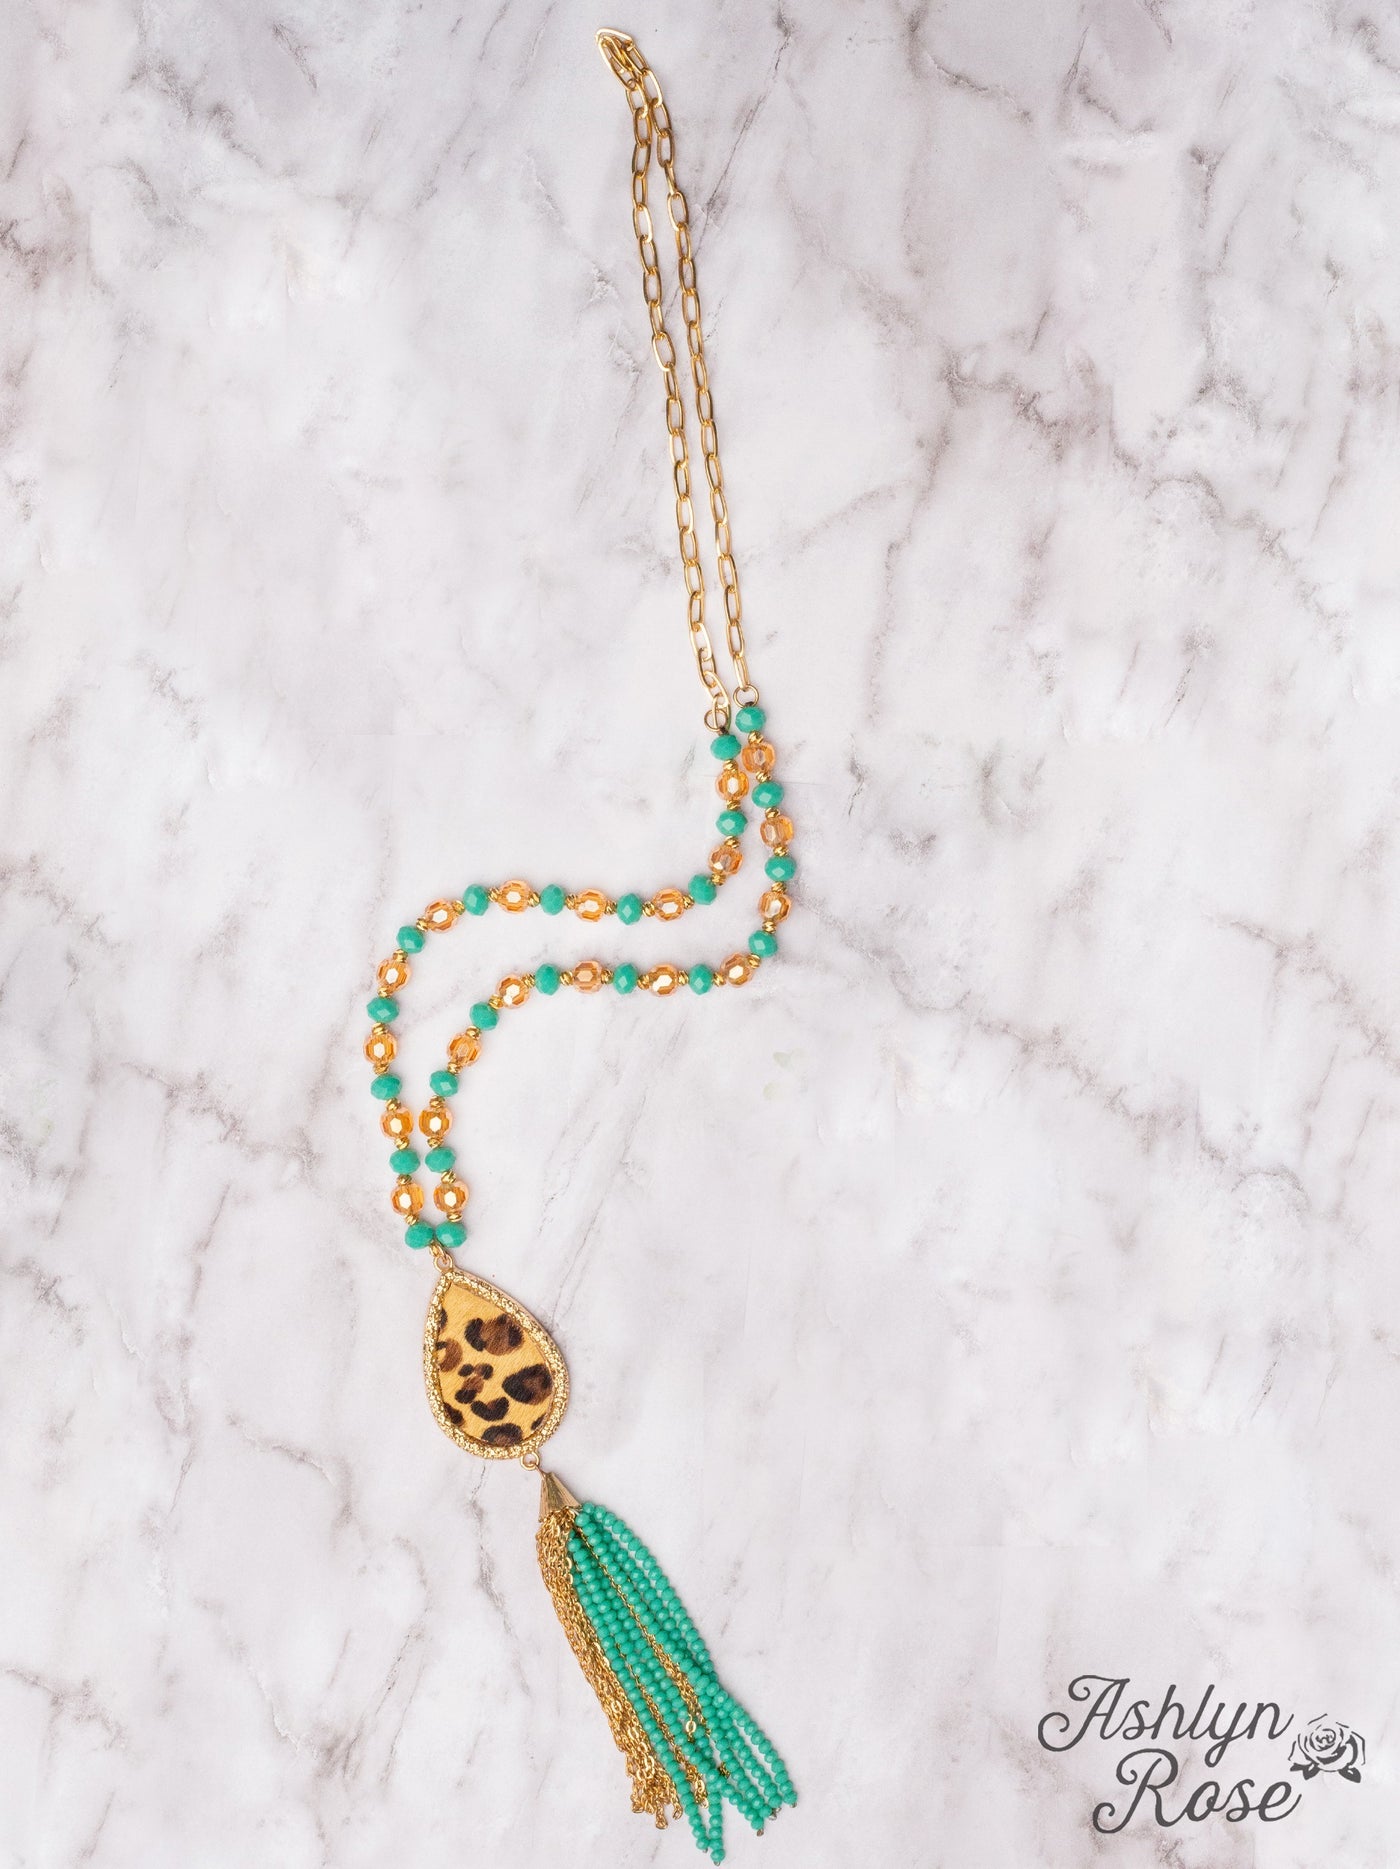 DON'T UNDERESTIMATE ME LEOPARD PENDANT WITH TURQUOISE BEADED TASSELS ON A CRYSTAL GOLD CHAIN NECKLACE